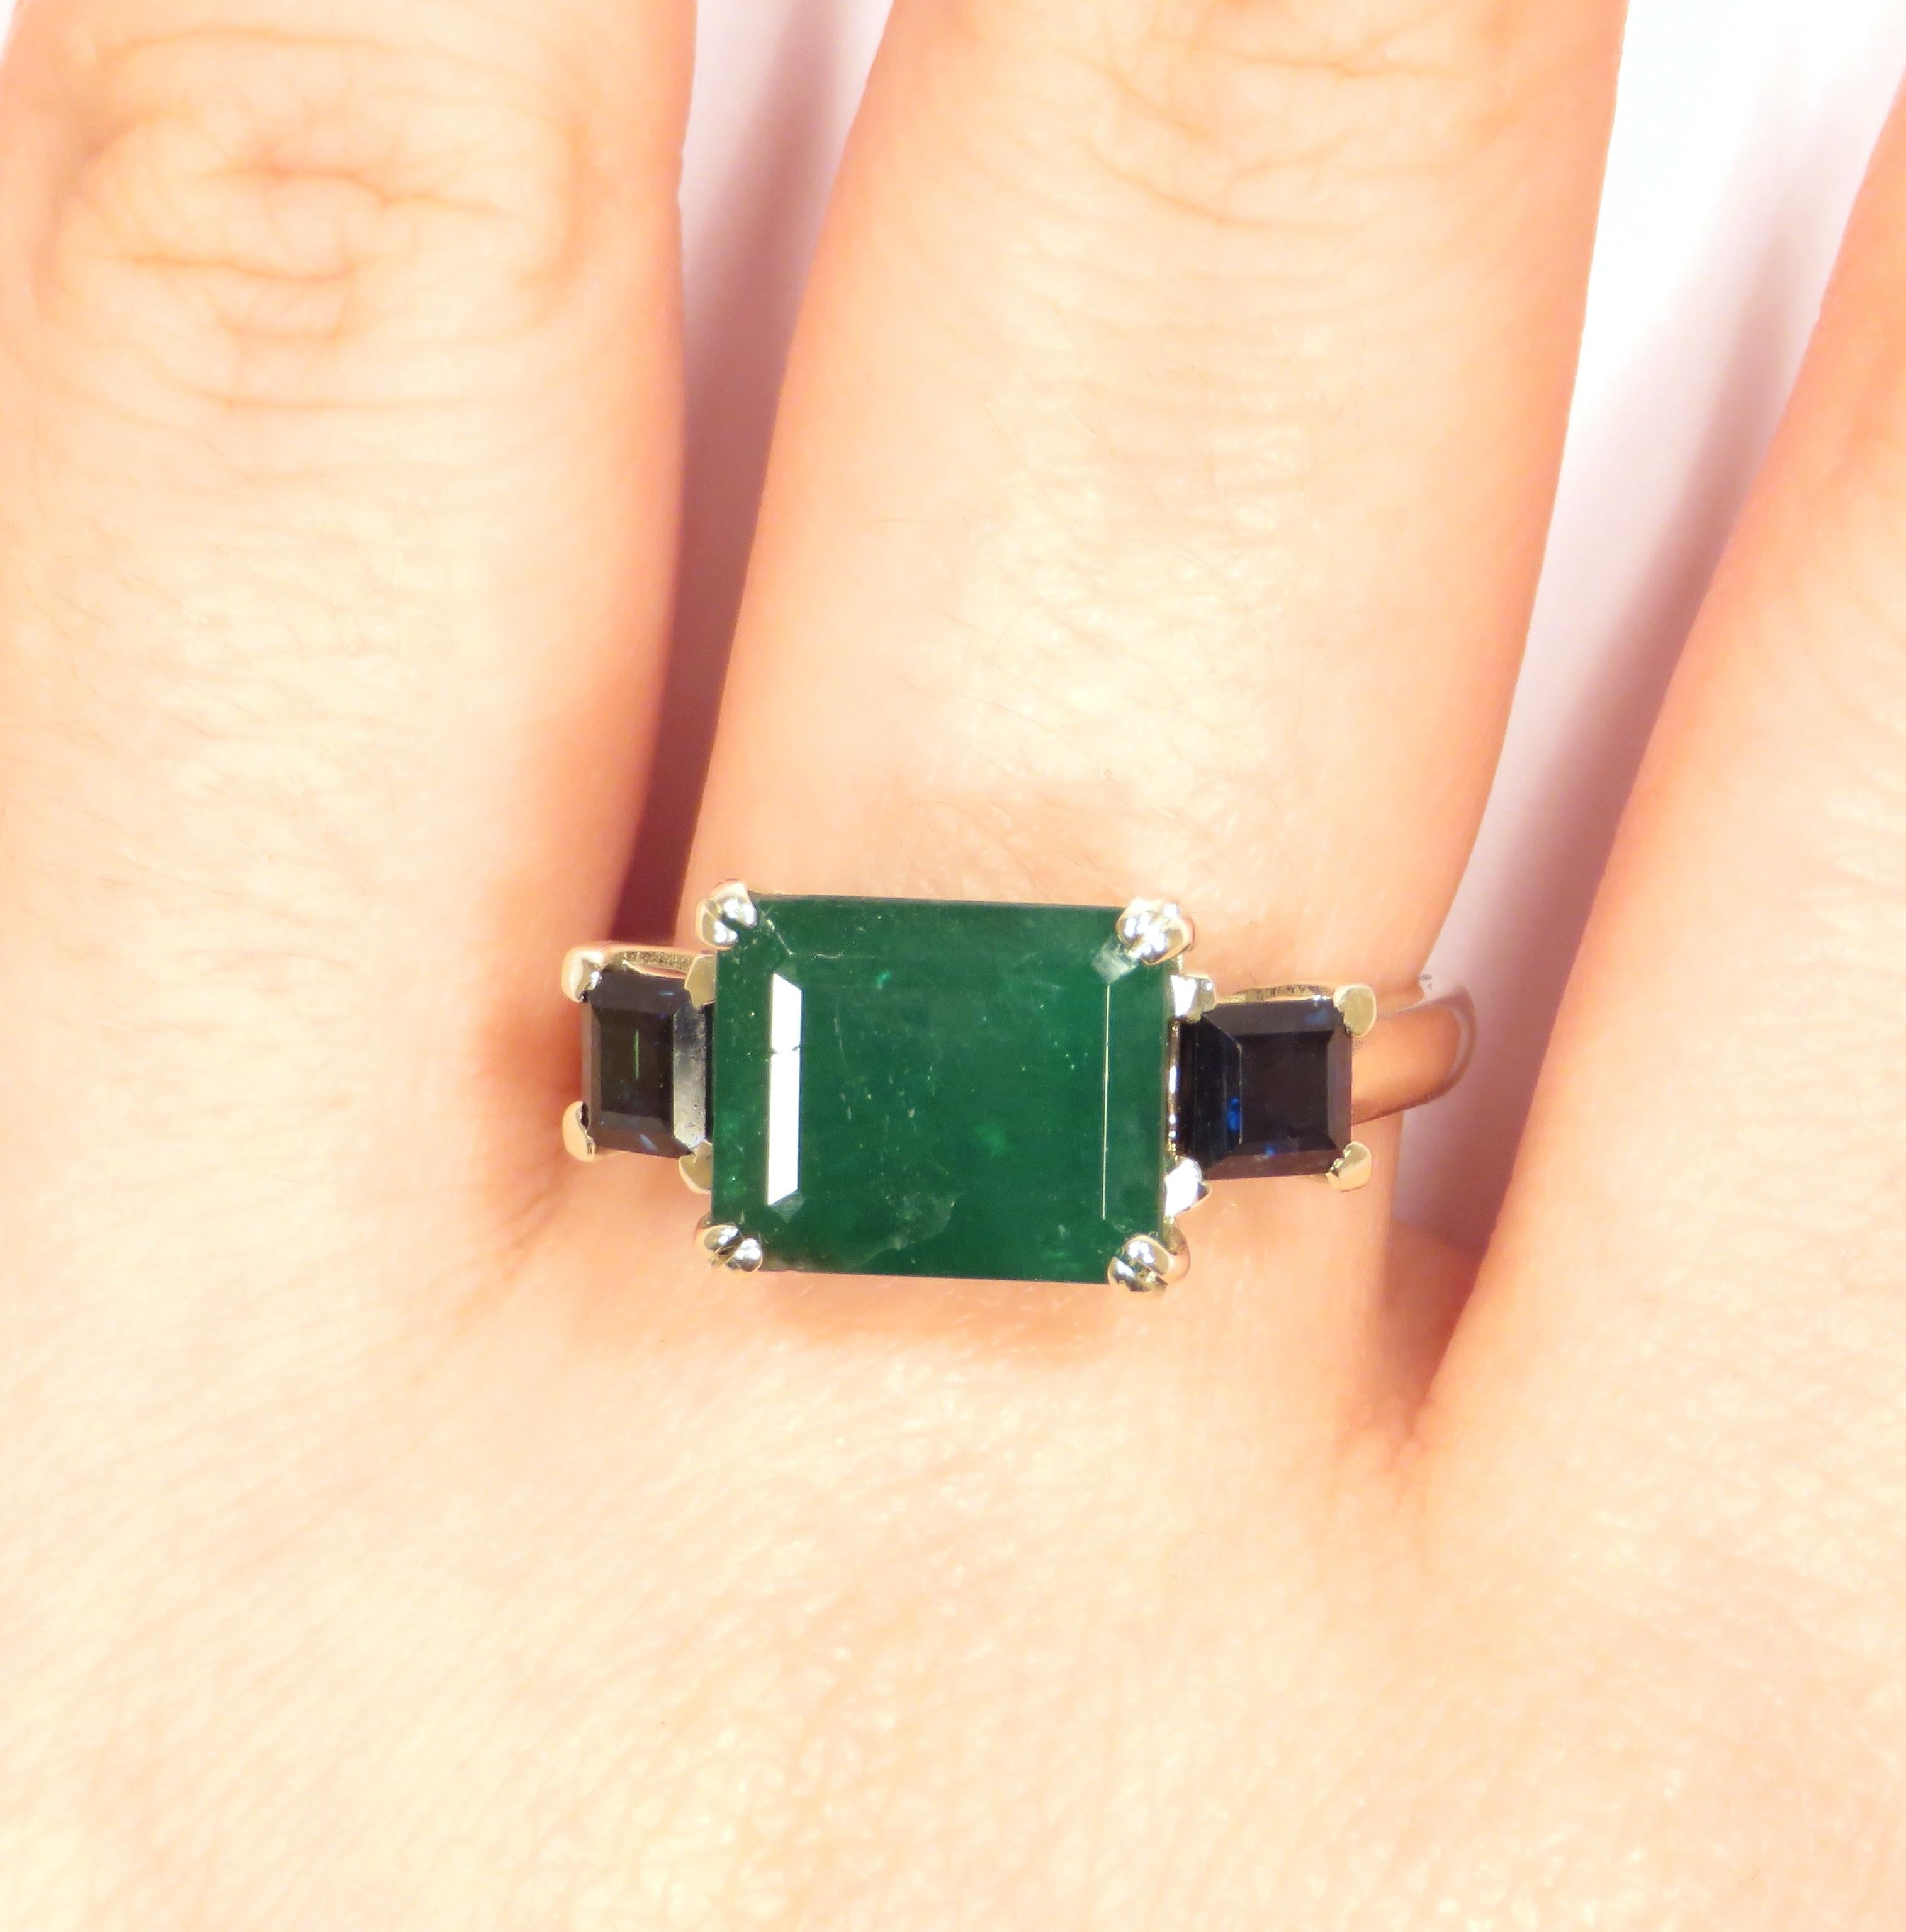 Engagement ring showcasing a beautiful emerald with 2 sapphires set in 9 karat white gold. The emerald size is 10,40 x 8,60 mm - 0.4094 x 0.3385 inches. US finger size is 7 1/2, French size 56, Italian size 16, the ring can be resized to the